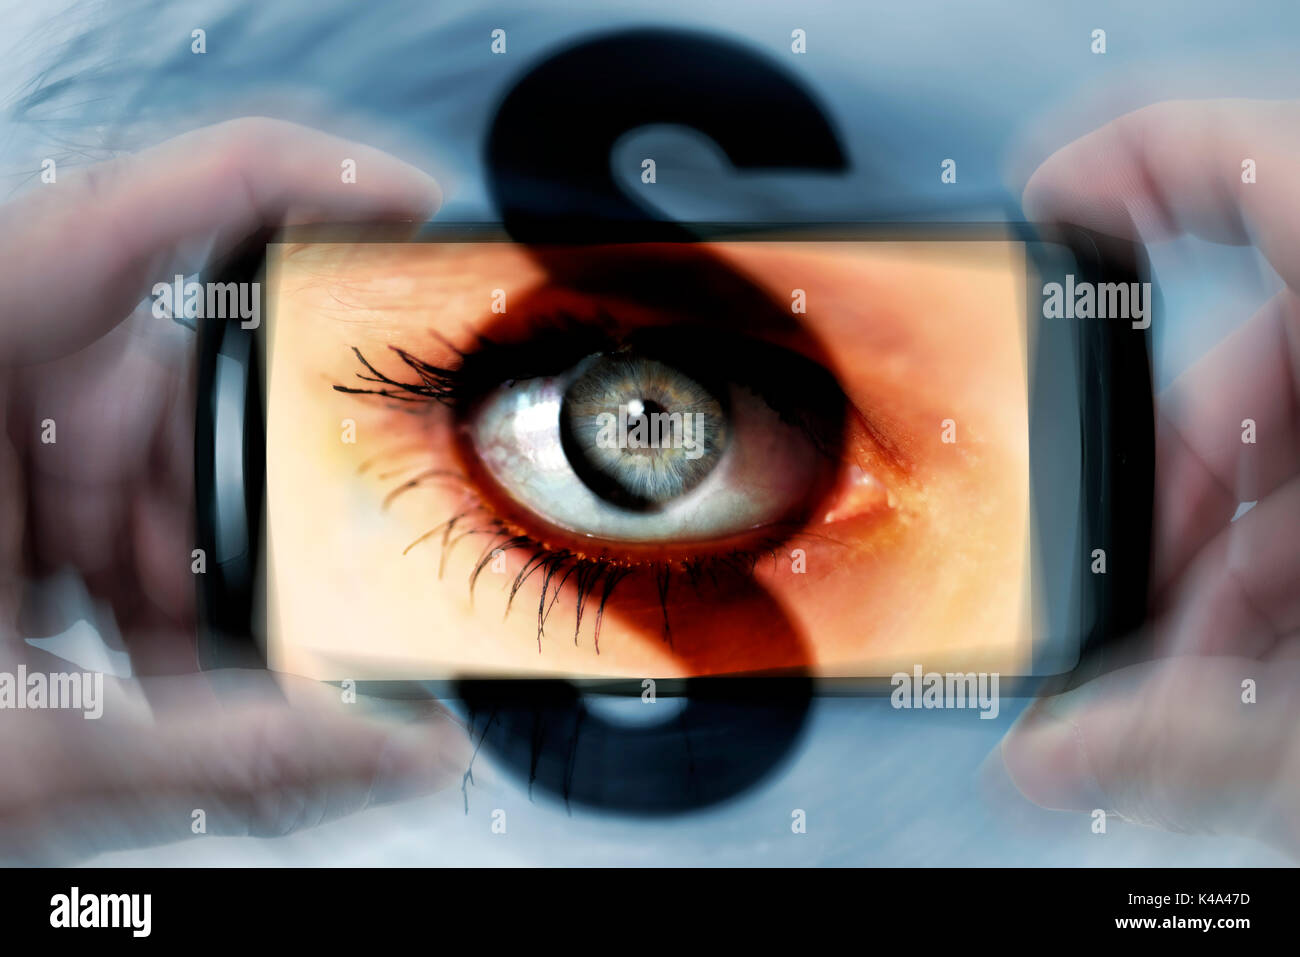 Womans Eye And Paragraph Sign In A Cellphone, Gawker Stock Photo